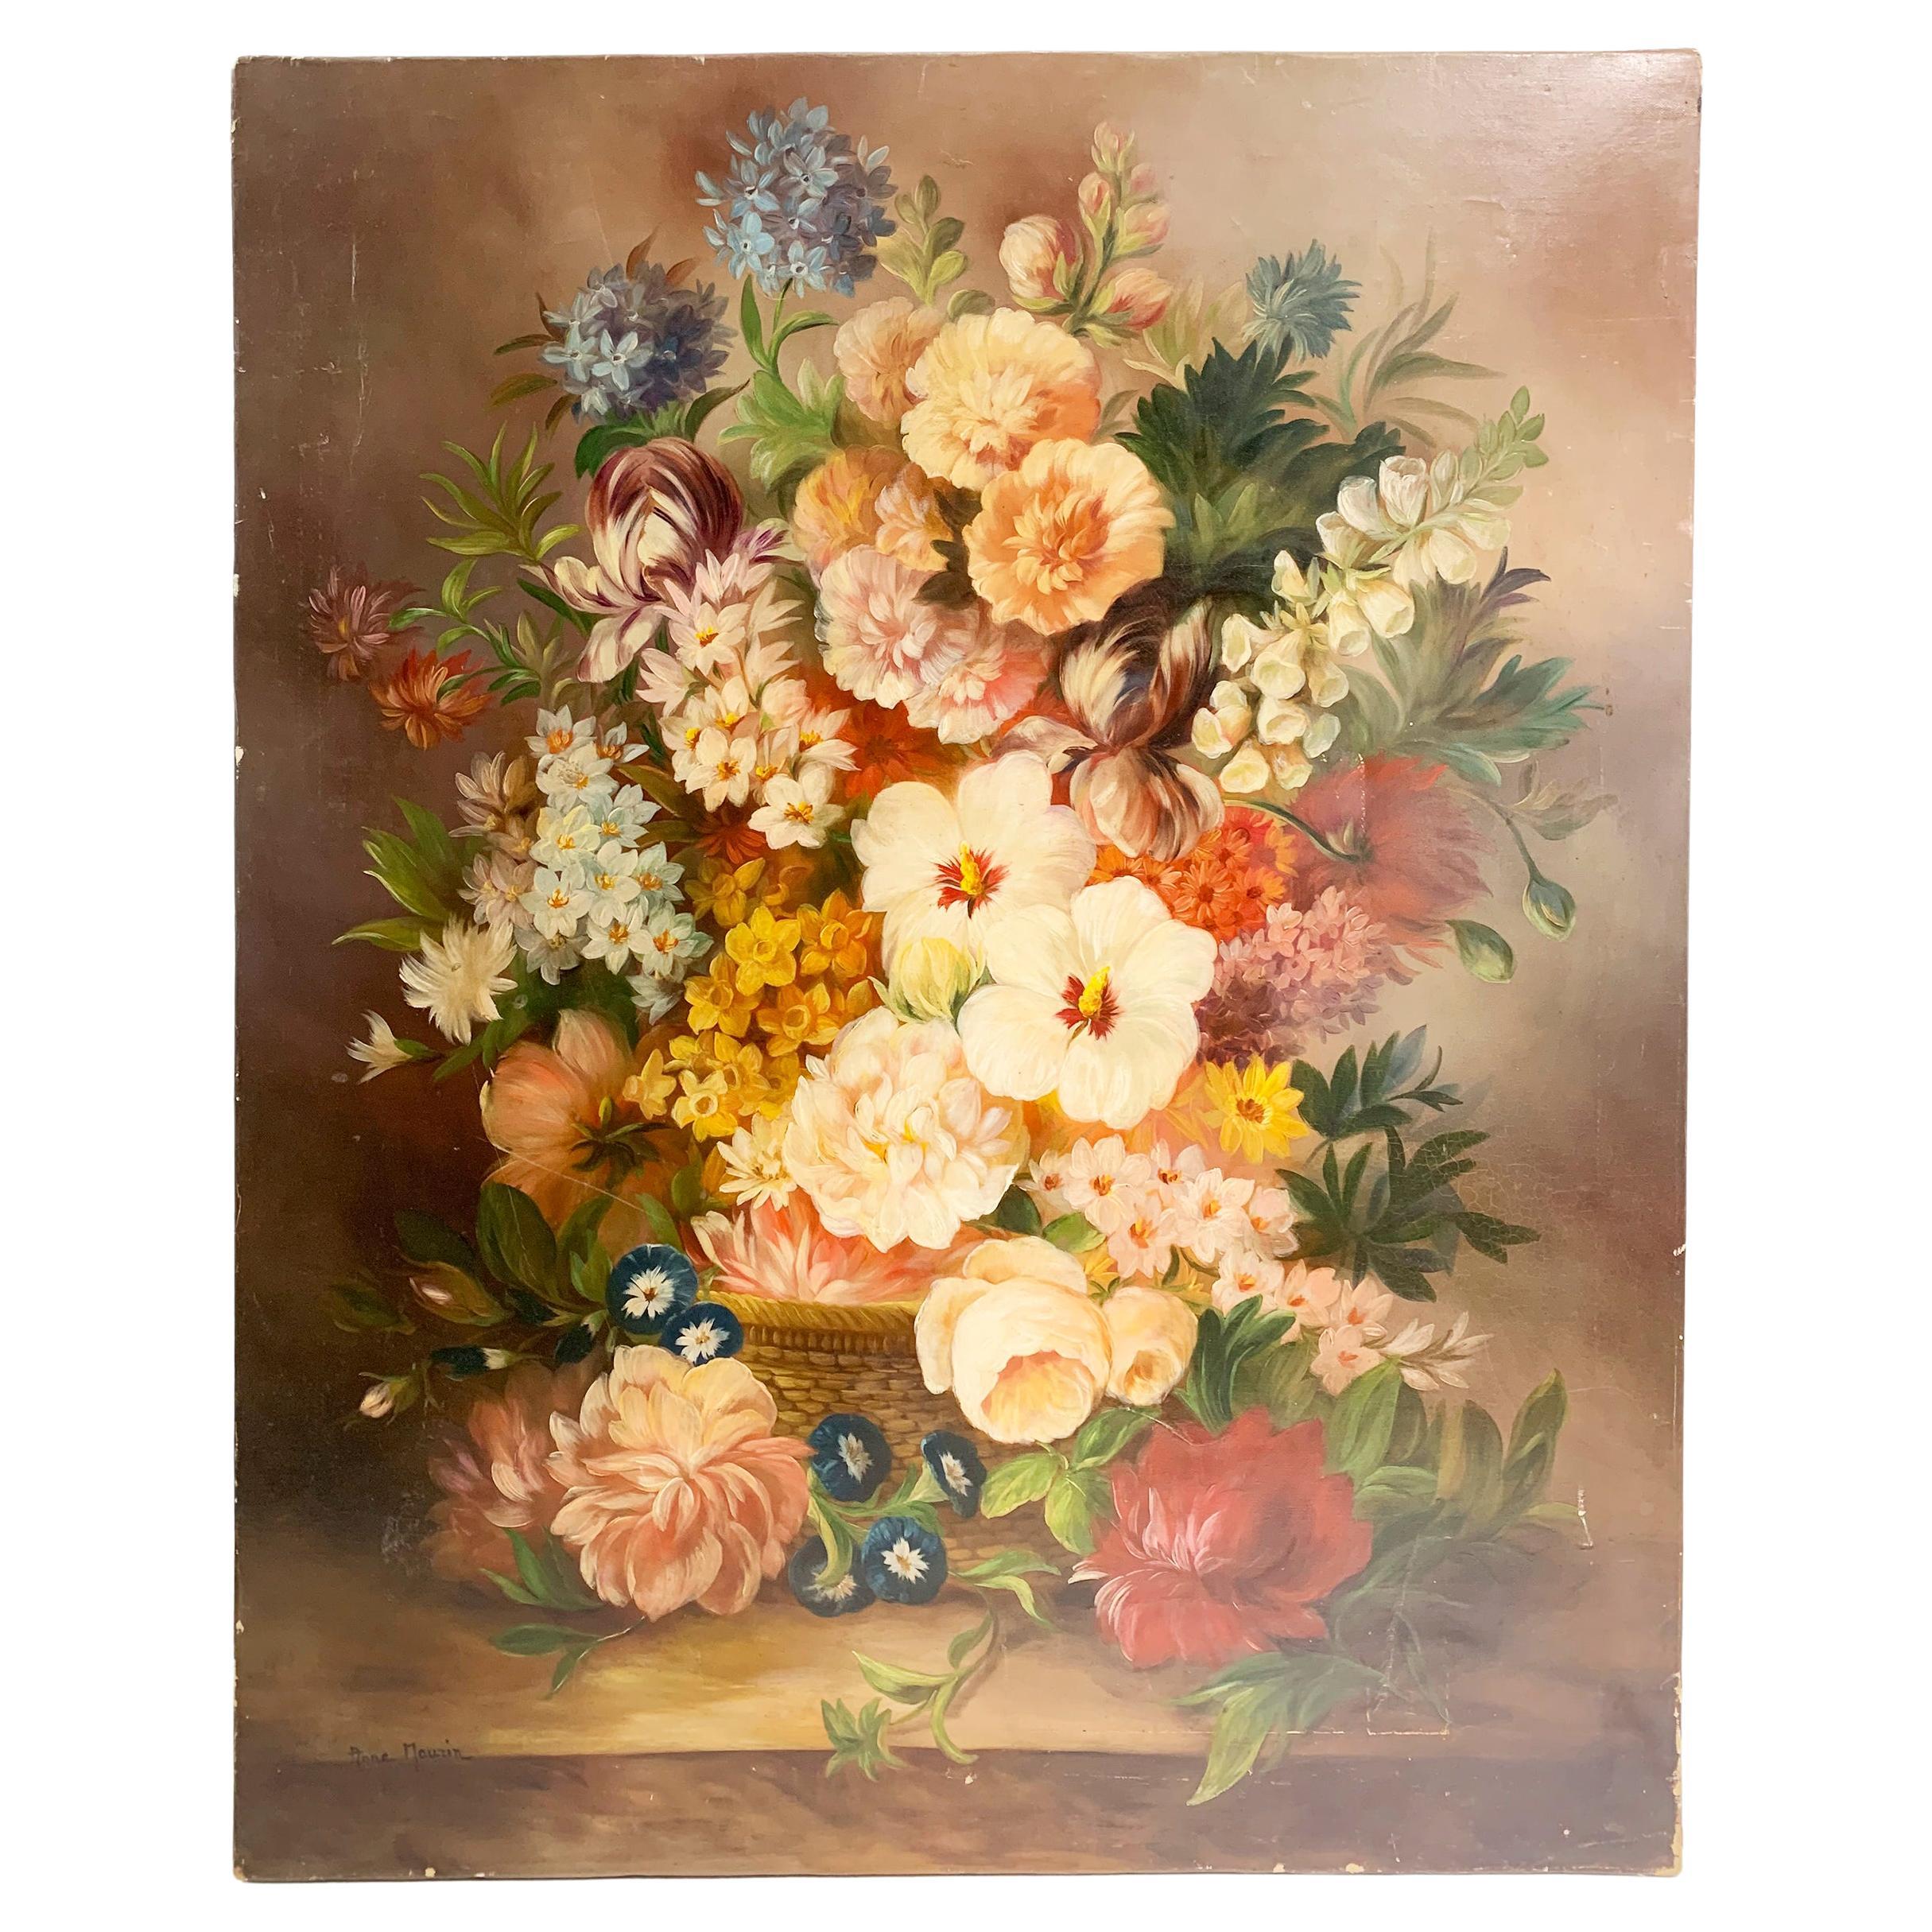 19th Century Floral Still Life Painting - Oil on Canvas - Signed Anne Maurin For Sale